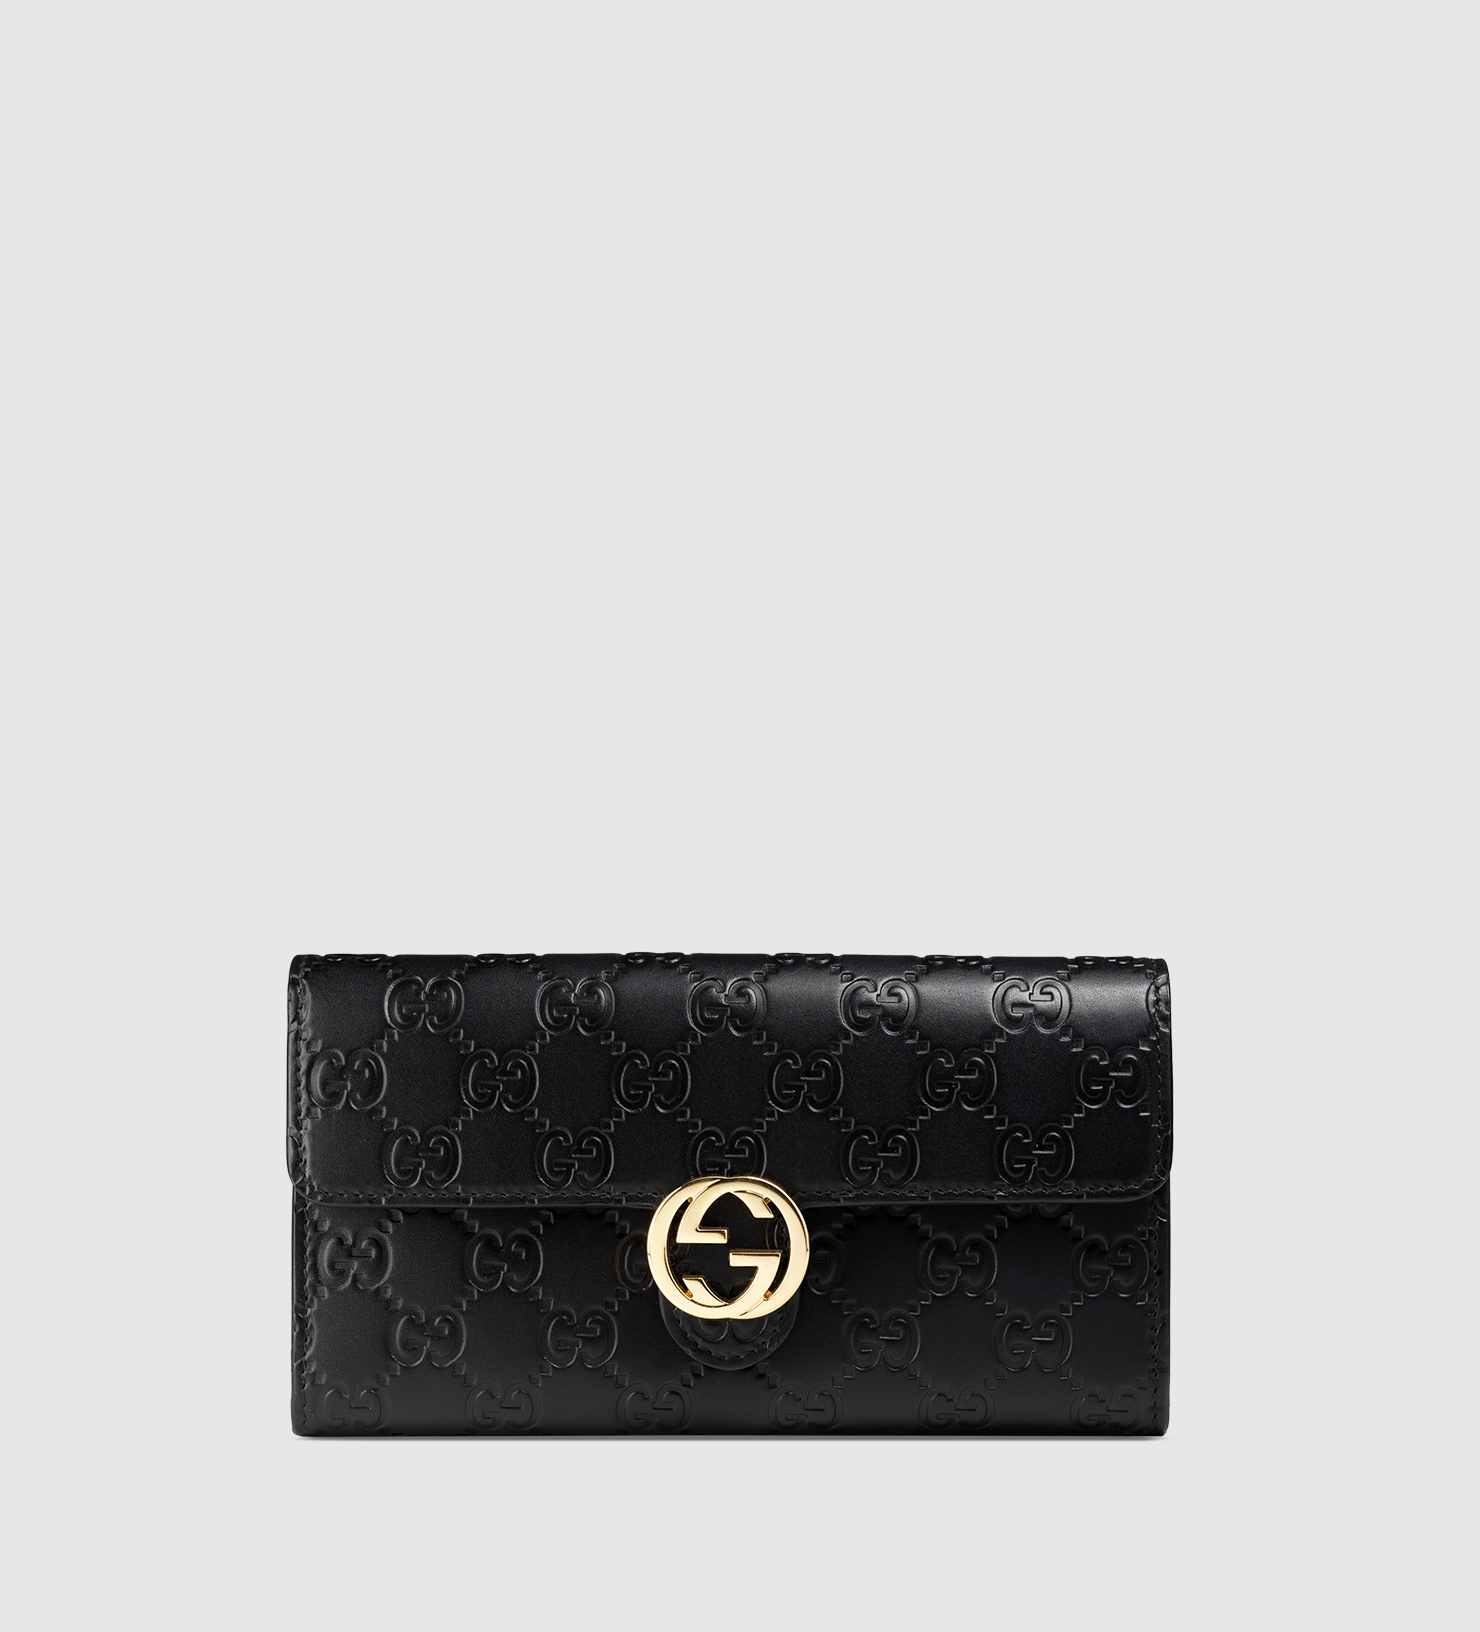 Lyst - Gucci Icon Leather Gg Wallet in Black